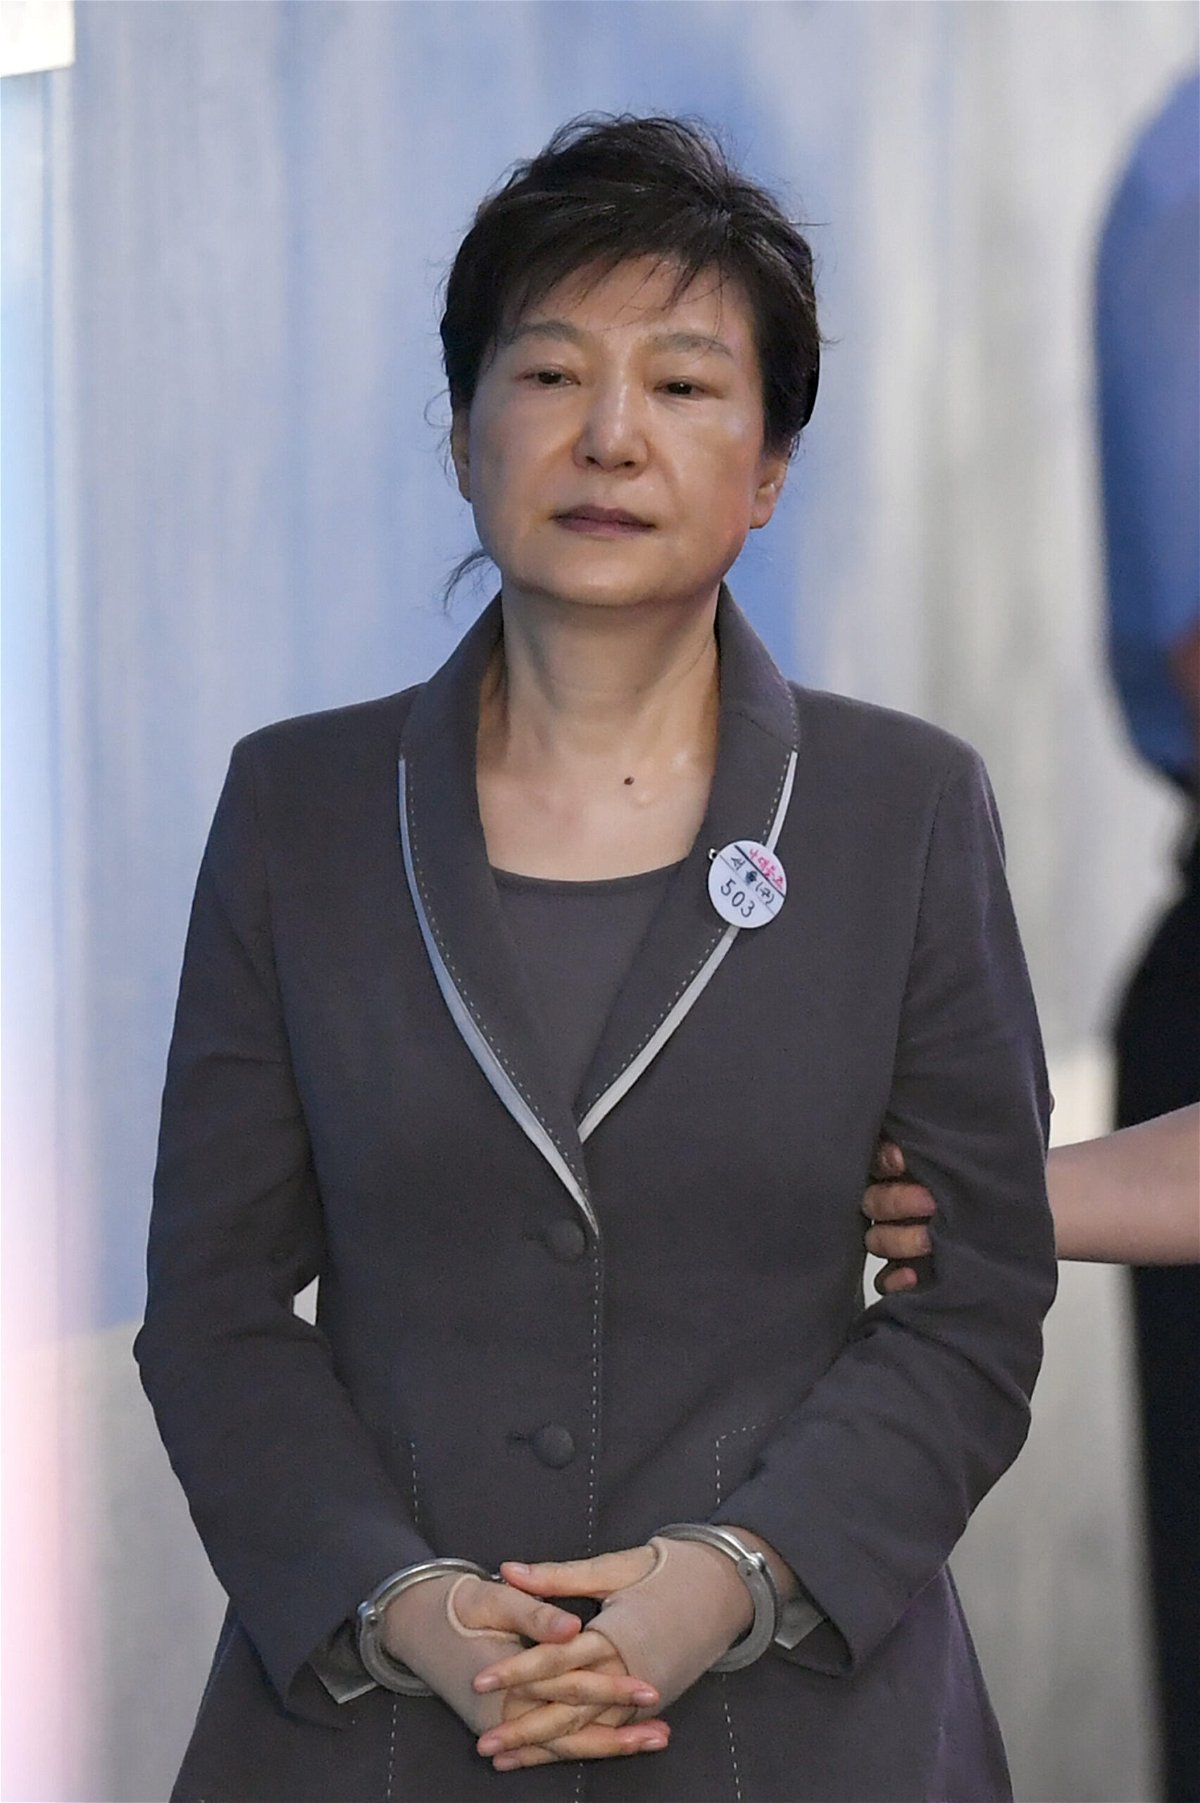 <i>Jung Yeon-Je/AFP/Getty Images</i><br/>The South Korean government has pardoned former President Park Geun-hye